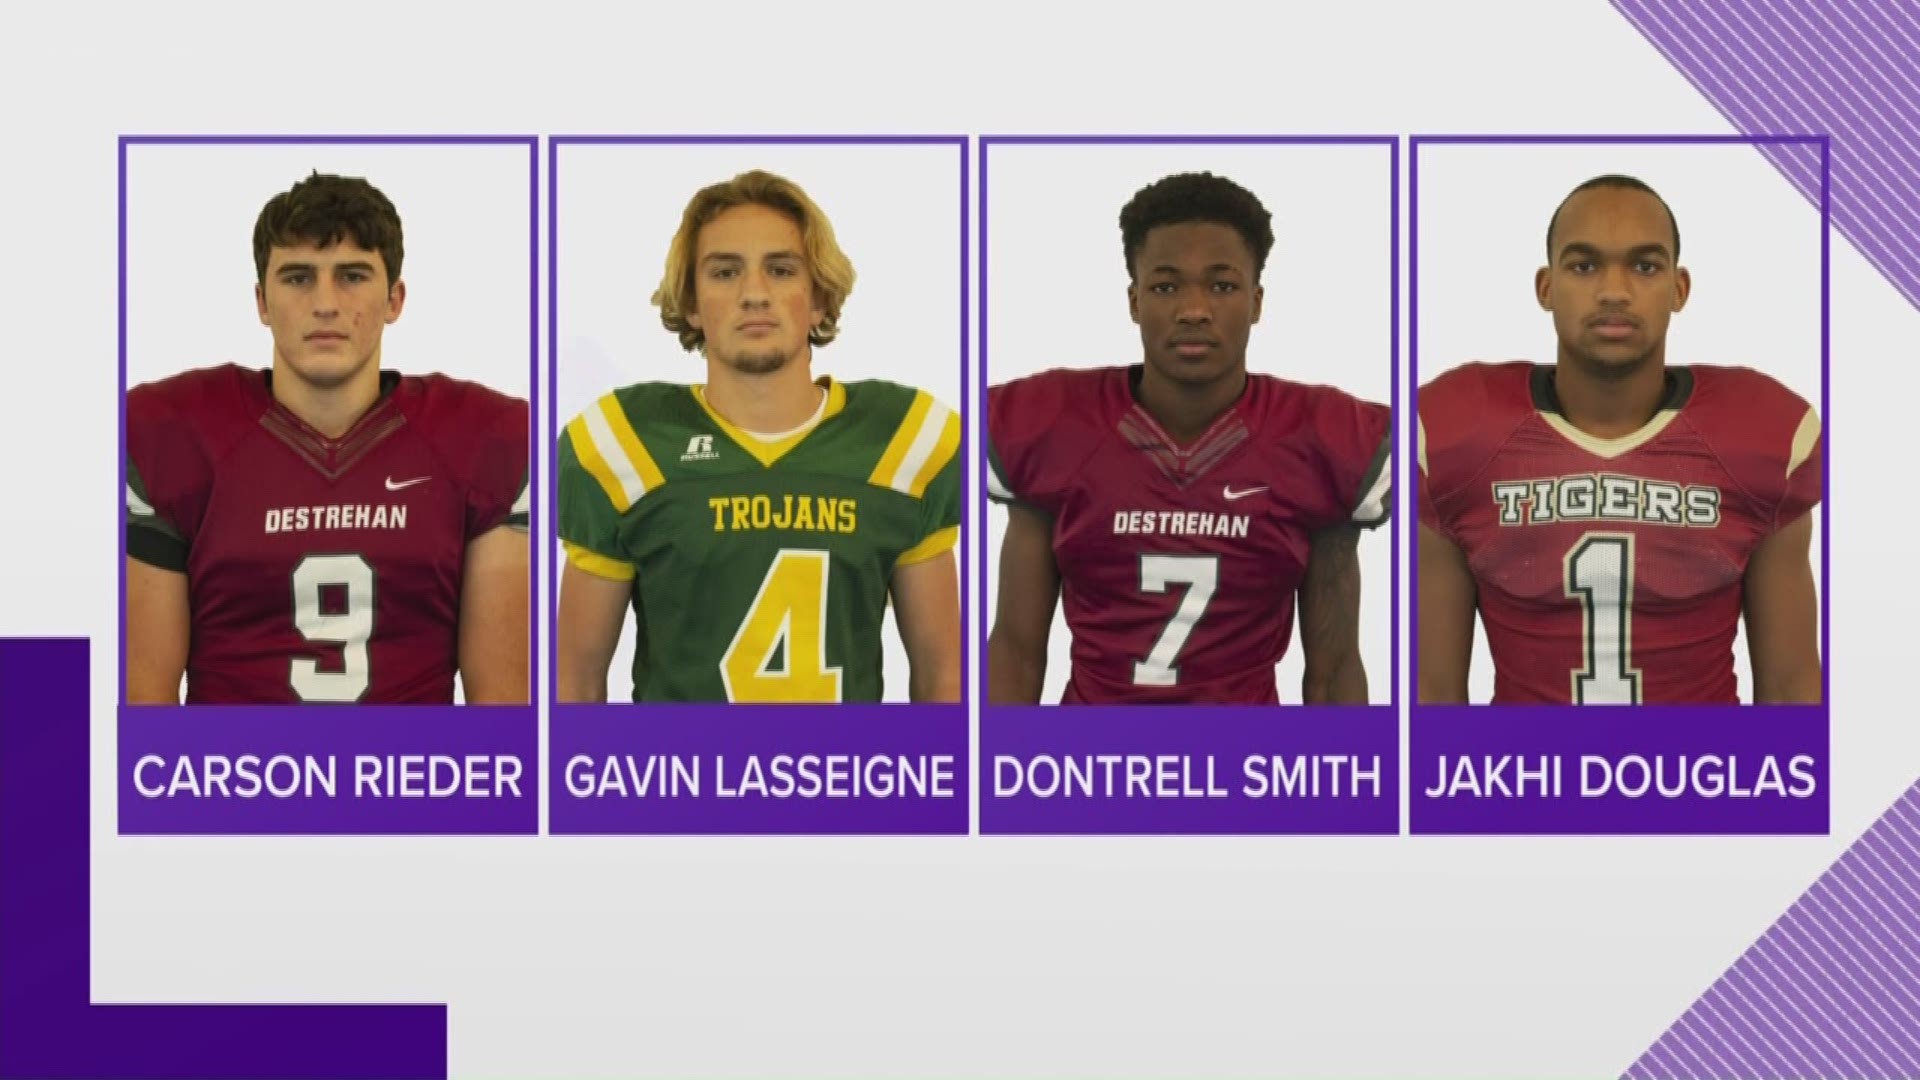 A long-standing tradition at Channel 4, we're honoring the best 5-A football players in the area.